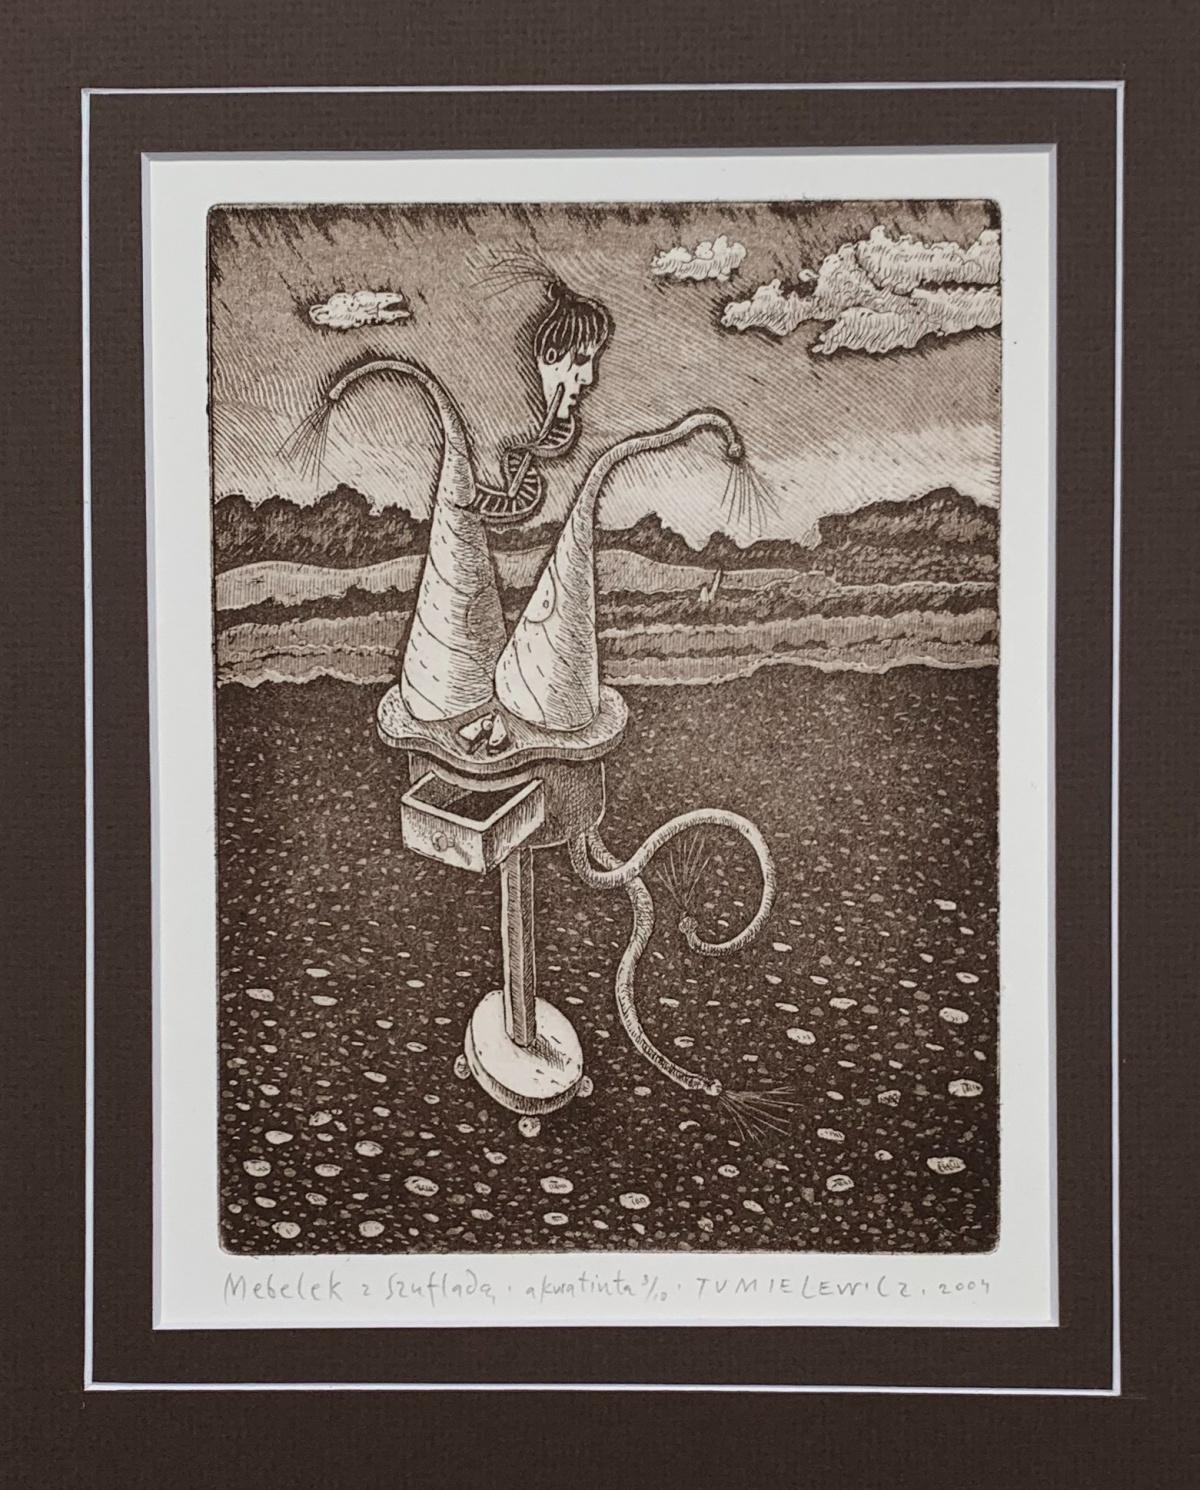 Furniture with a drawer - Figurative Etching Print Monochromatic Surreal - Brown Figurative Print by Czeslaw Tumielewicz